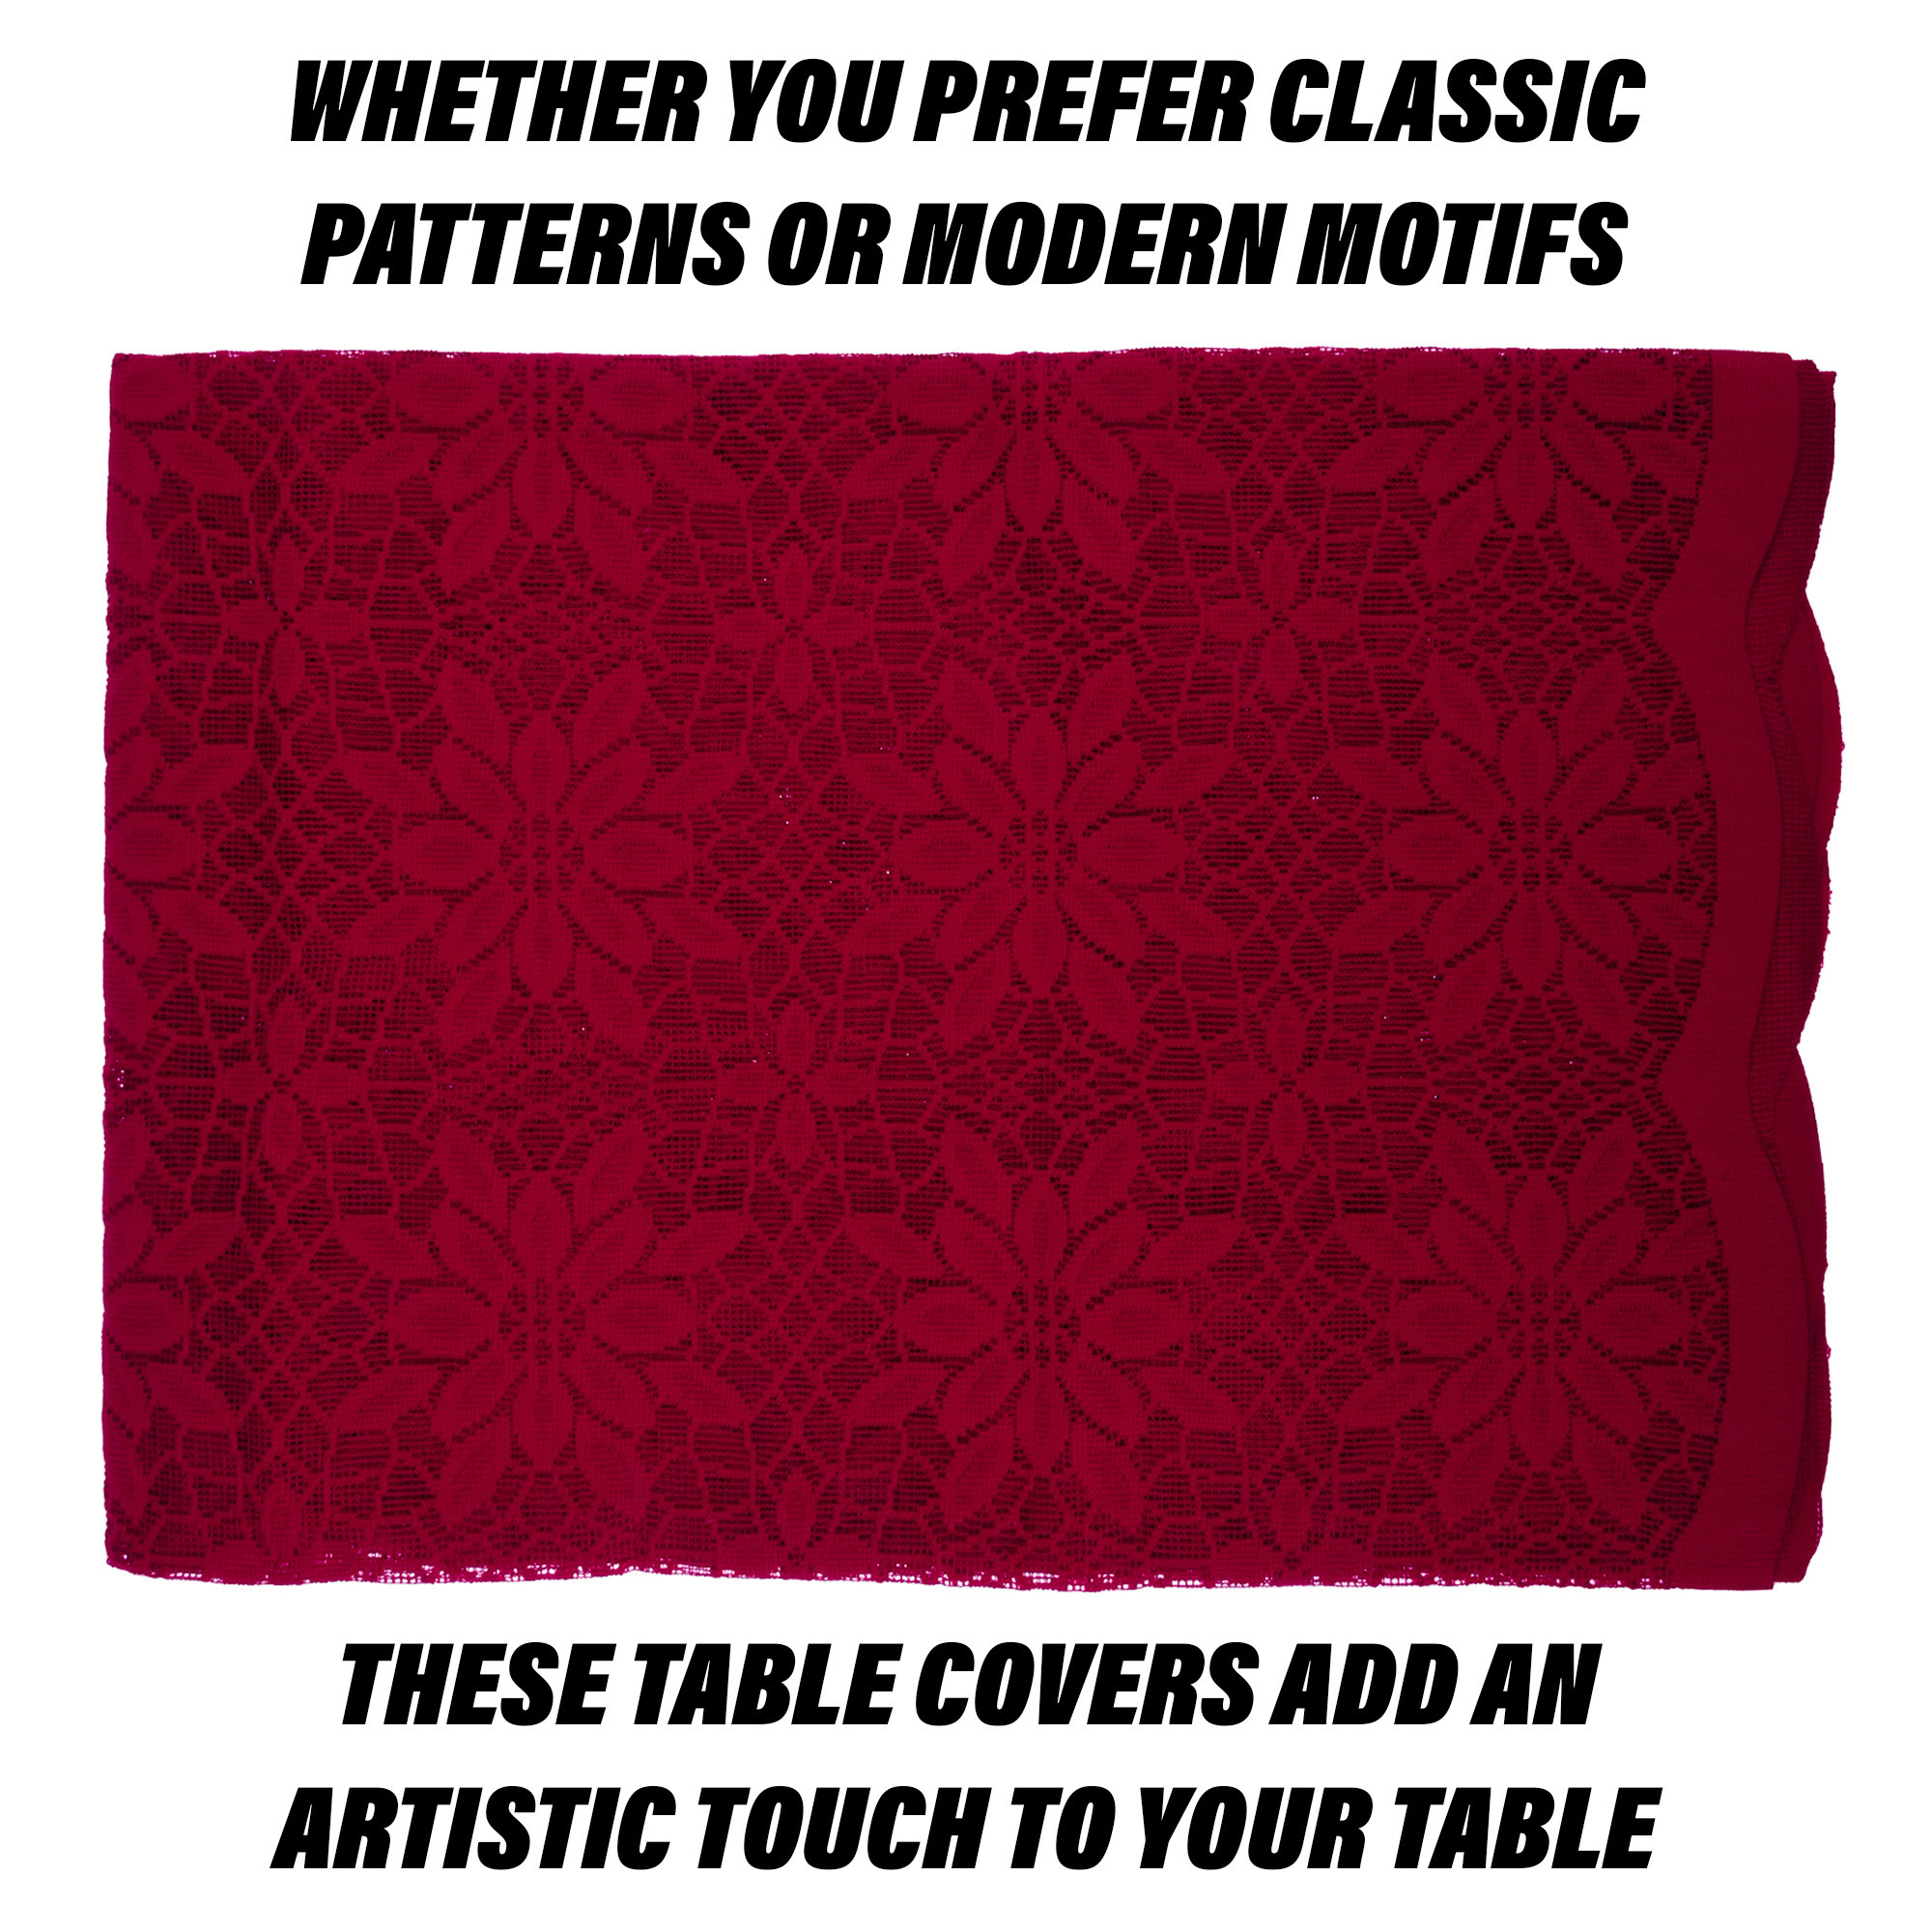 Kuber Industries Center Table Cover | Cotton Table Cloth Cover | 4-Seater Table Cloth | Plain Jasmin Flower Table Cover | Table Protector | Table Cover for Center Table | 40x60 Inch | Maroon